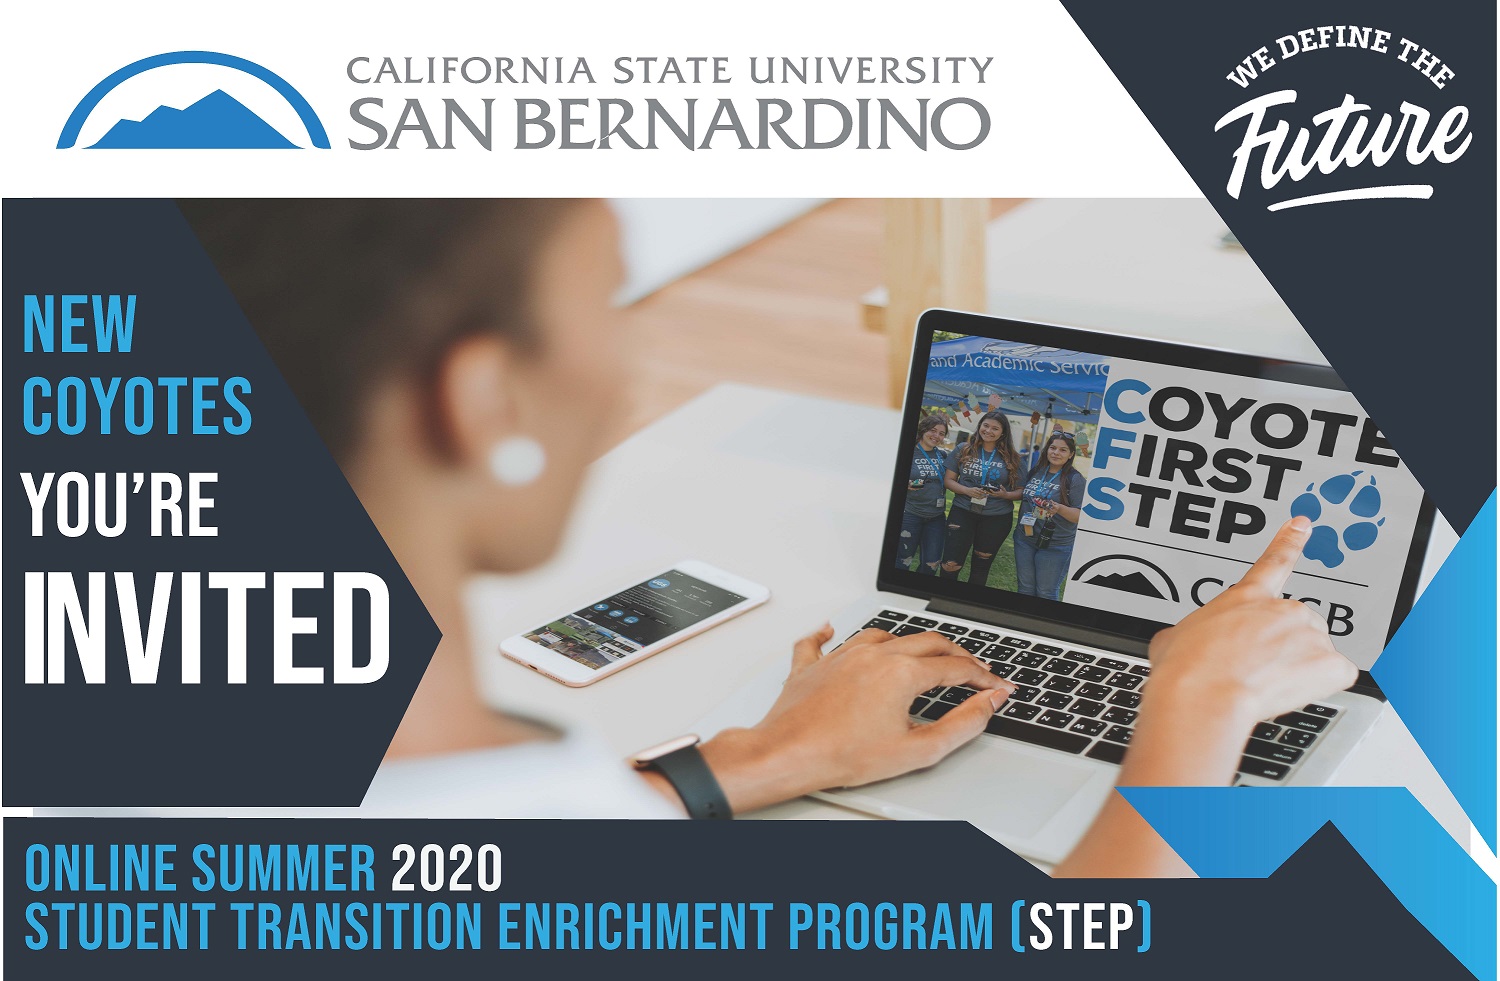 Early Start Program & Coyote First STEP CSUSB